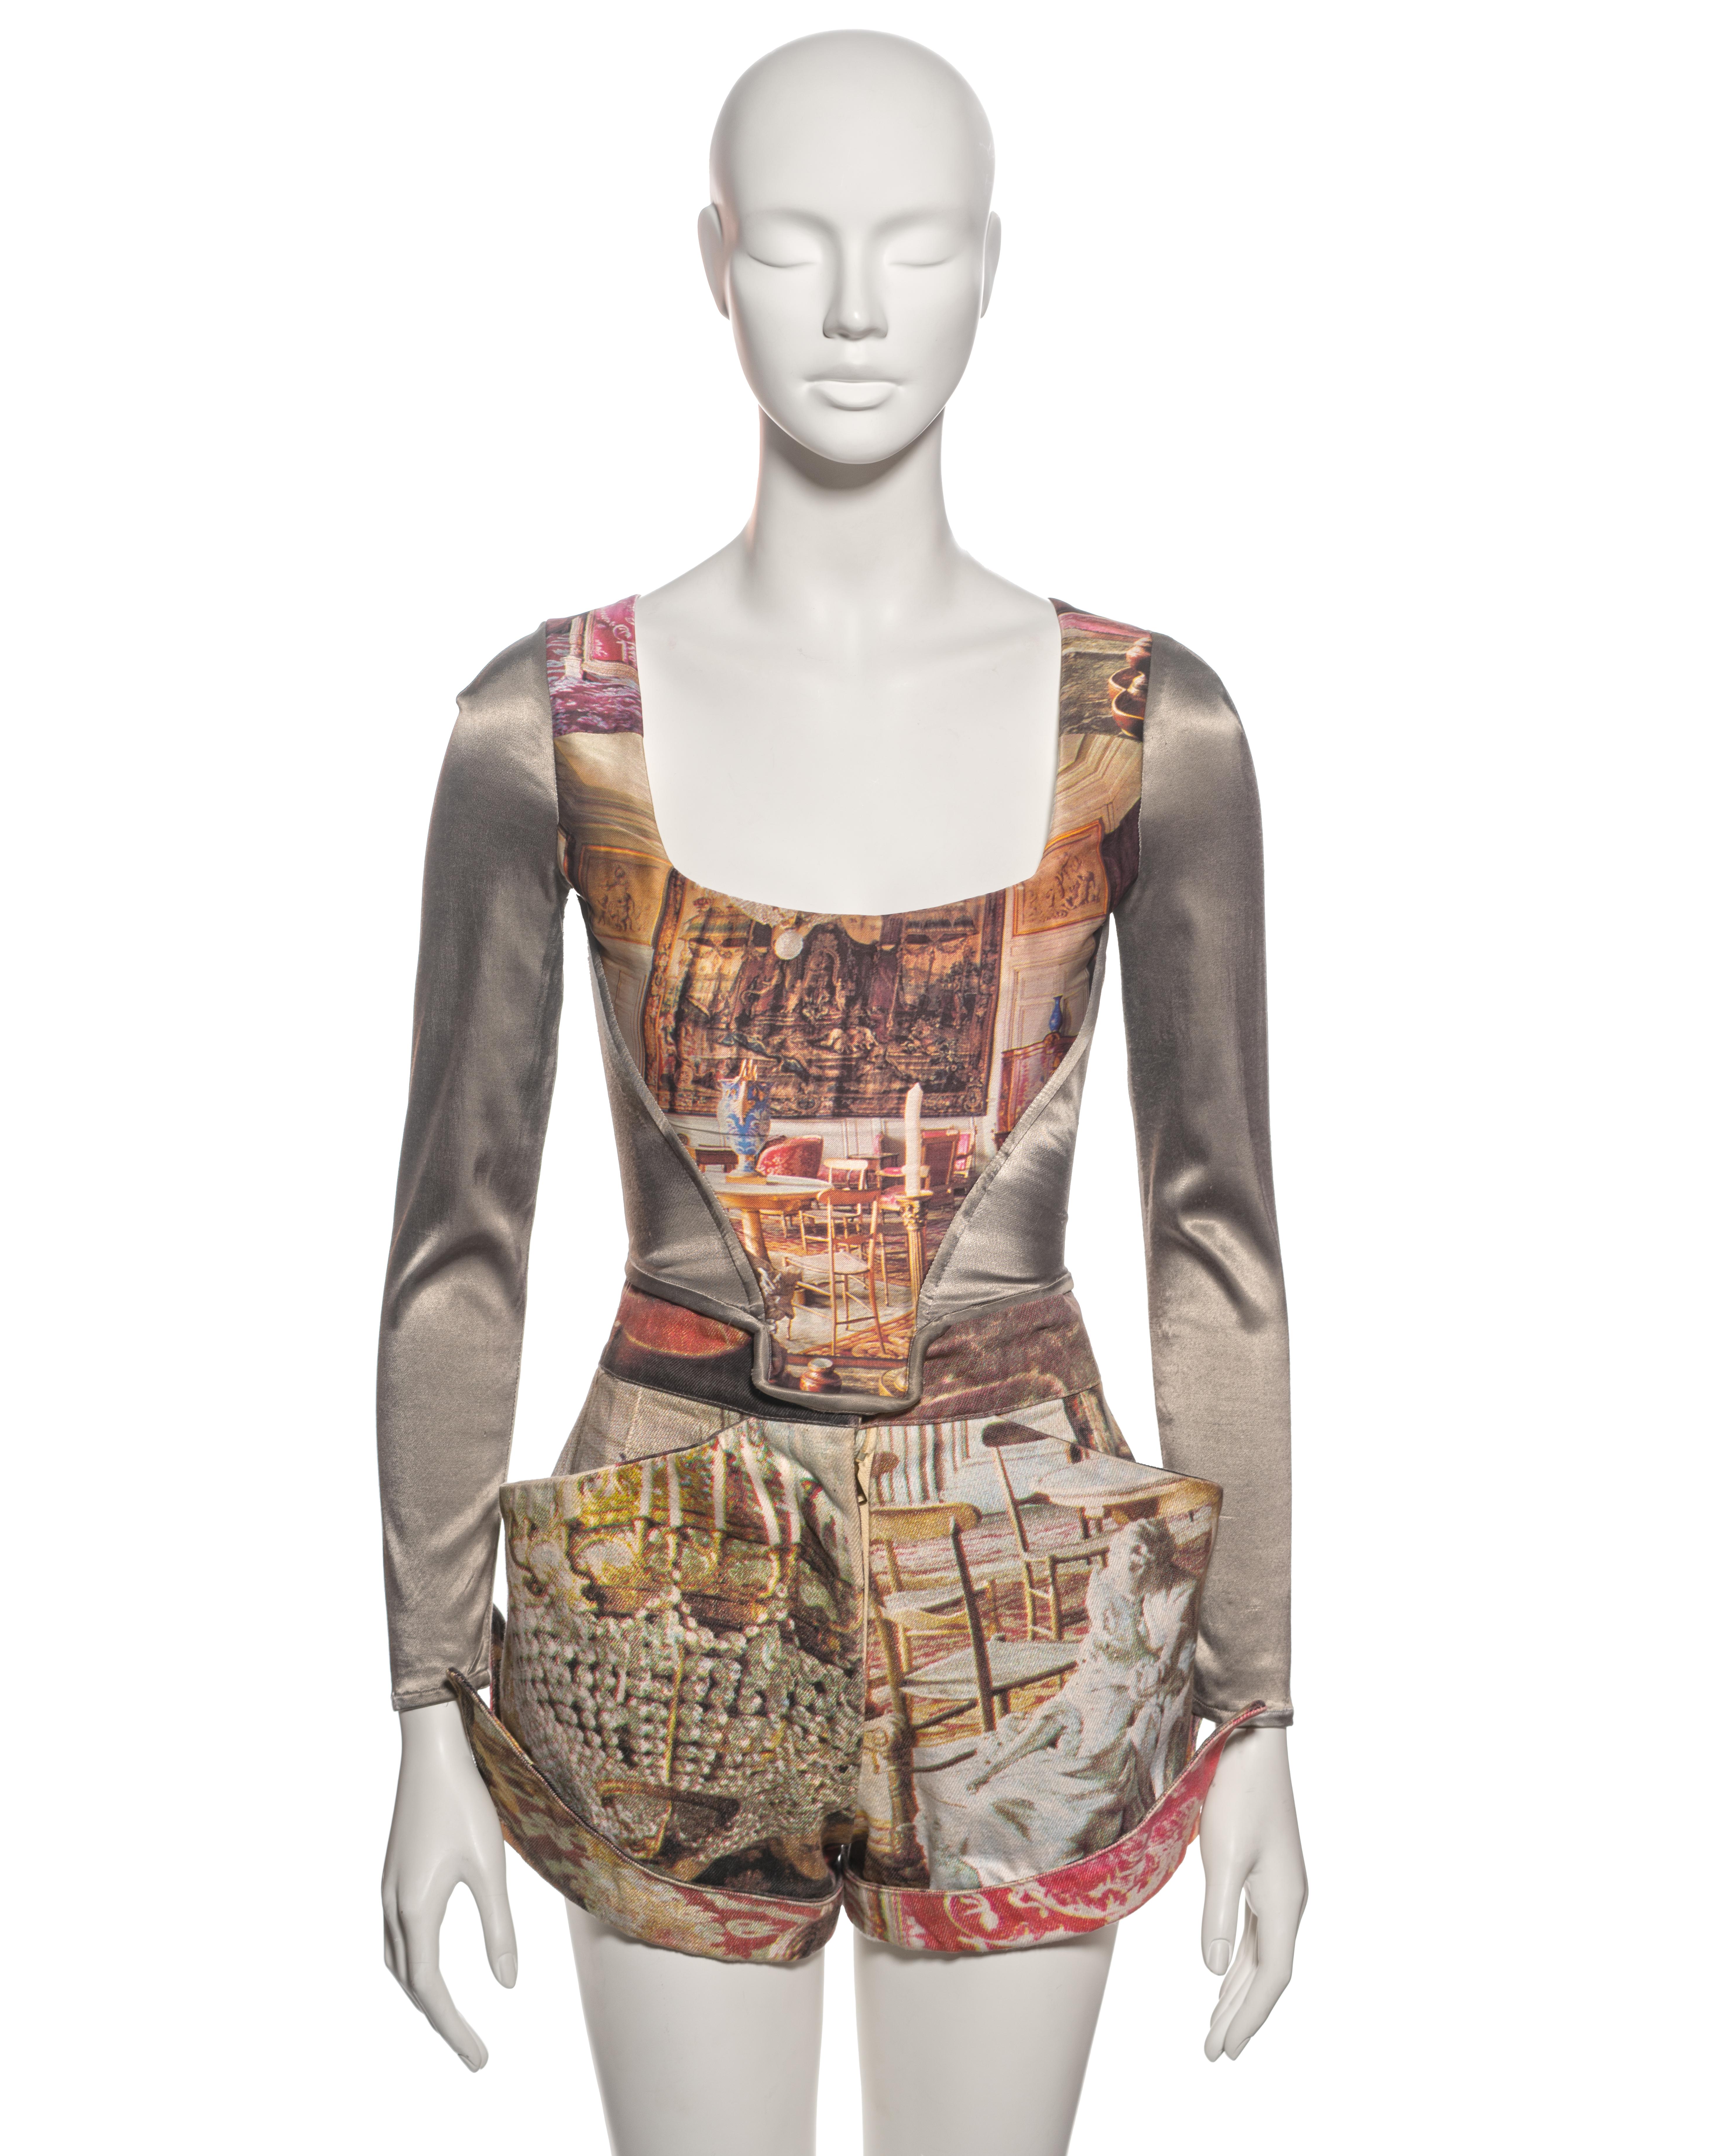 ▪ Archival Vivienne Westwood Corset and Shorts Set
▪ Spring-Summer 1992
▪ Long sleeve corset with a photographic print to front and back, of an 18th-century salon
▪ Side panels and sleeves of silver-grey lycra
▪ Matching printed denim mini shorts